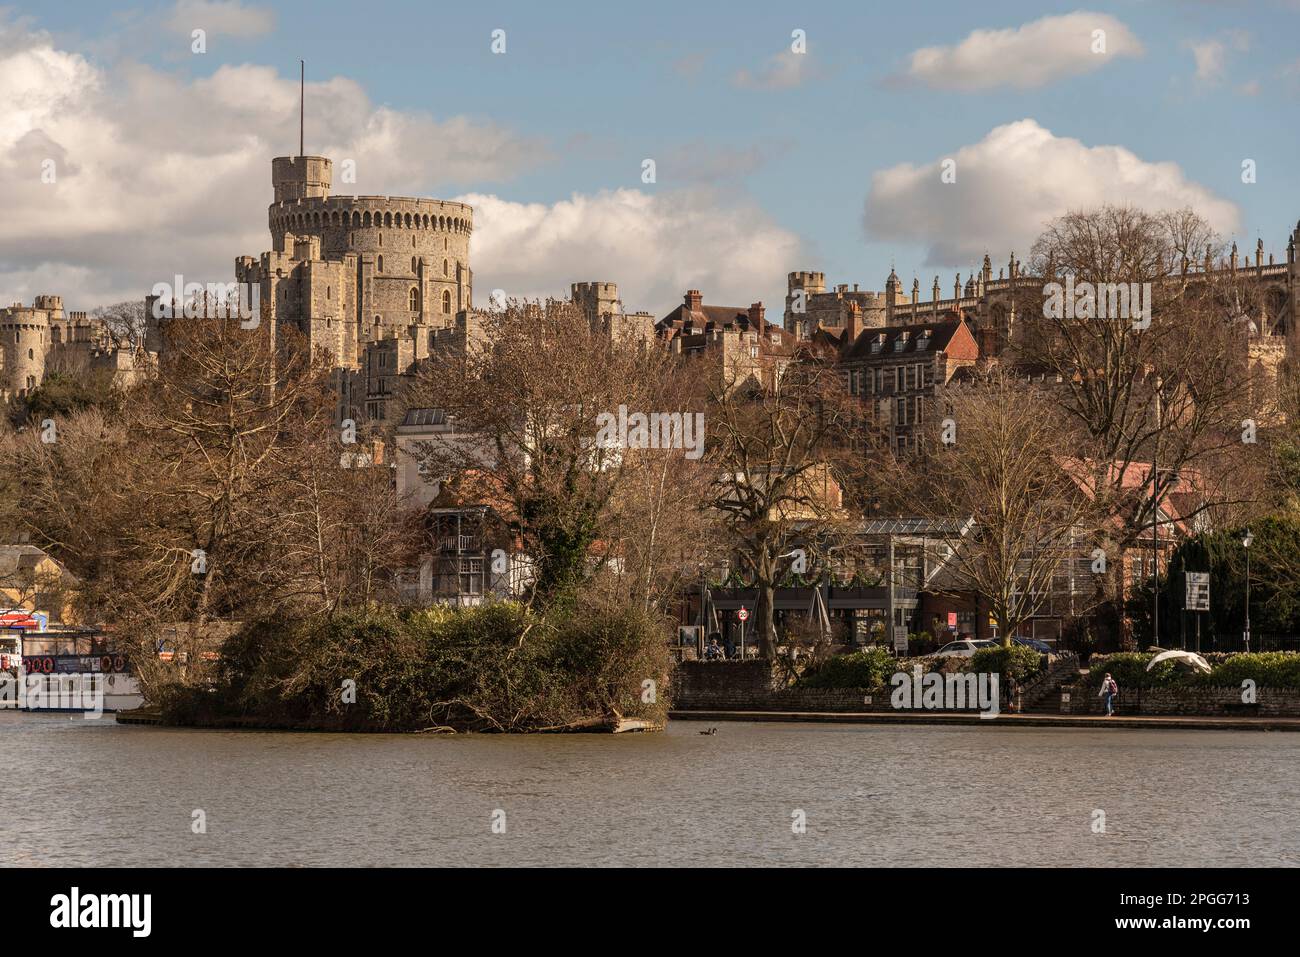 Windsor, Berkshire, England, UK. 2023. View of The Round Tower Windsor Castle across the River Thames in wintertime. Stock Photo